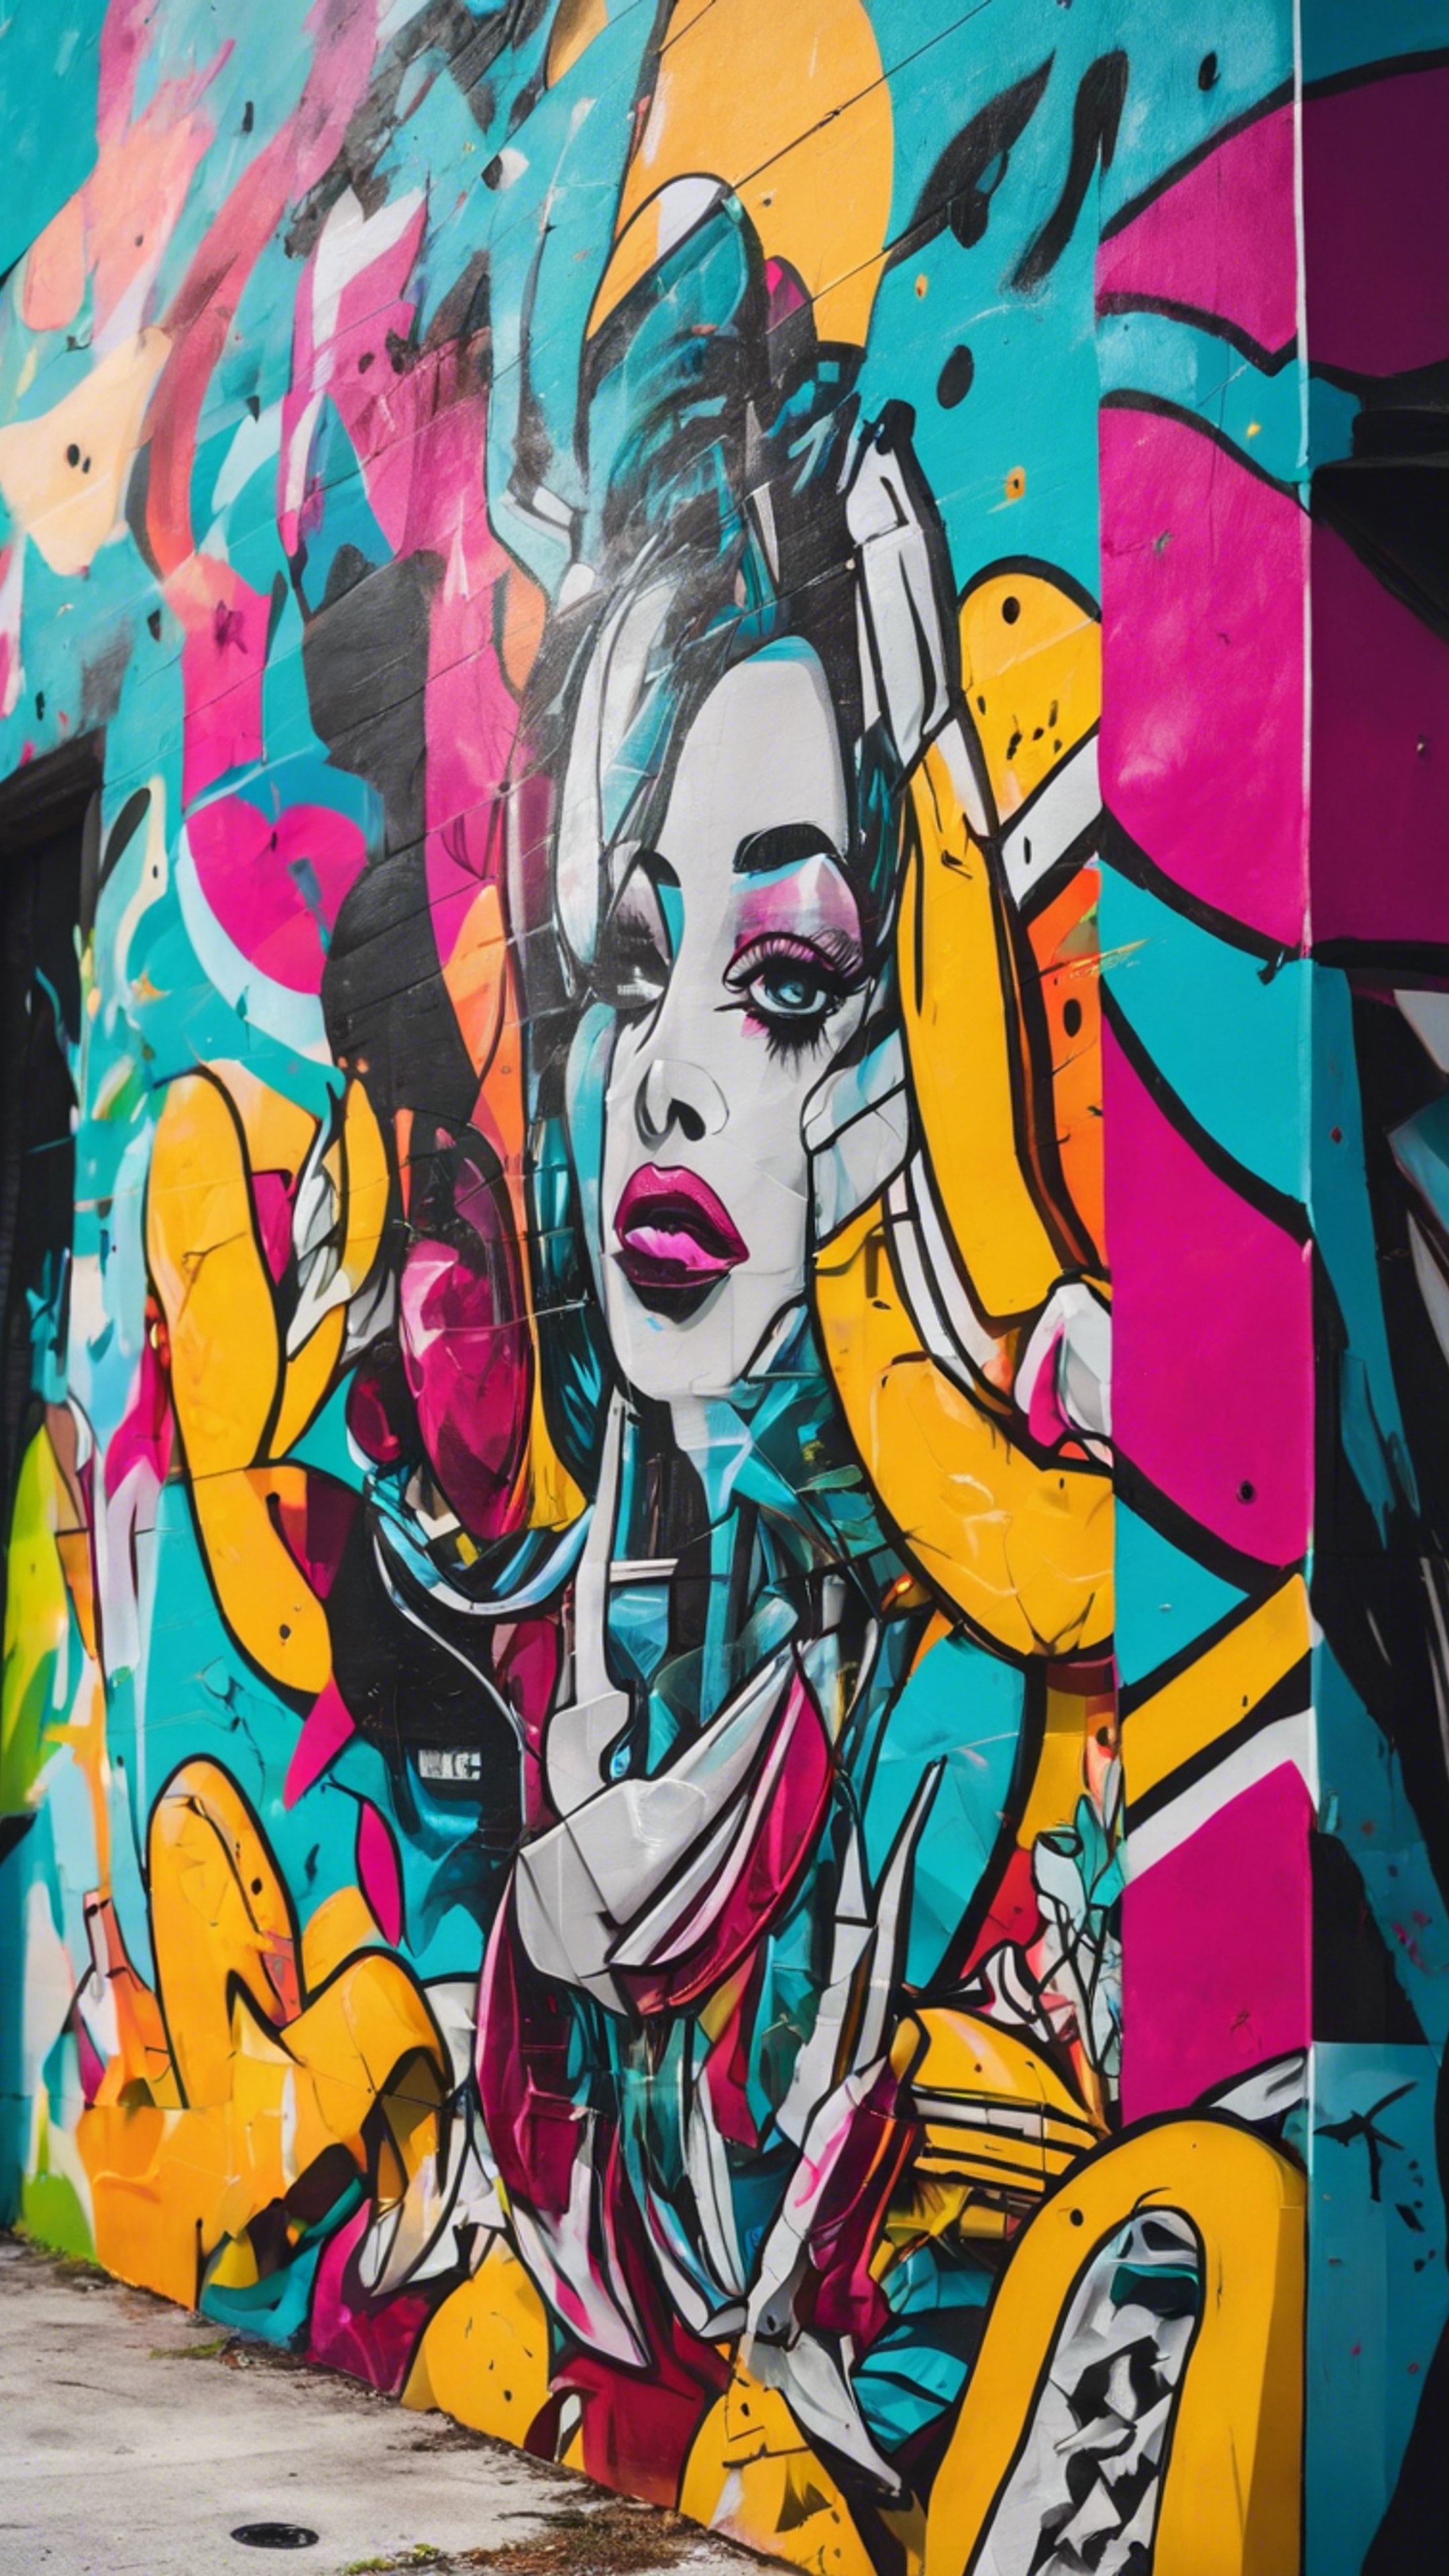 A vibrant street art mural in Wynwood, Miami, featuring abstract art and bright colors. Fondo de pantalla[fc74442468964623923a]